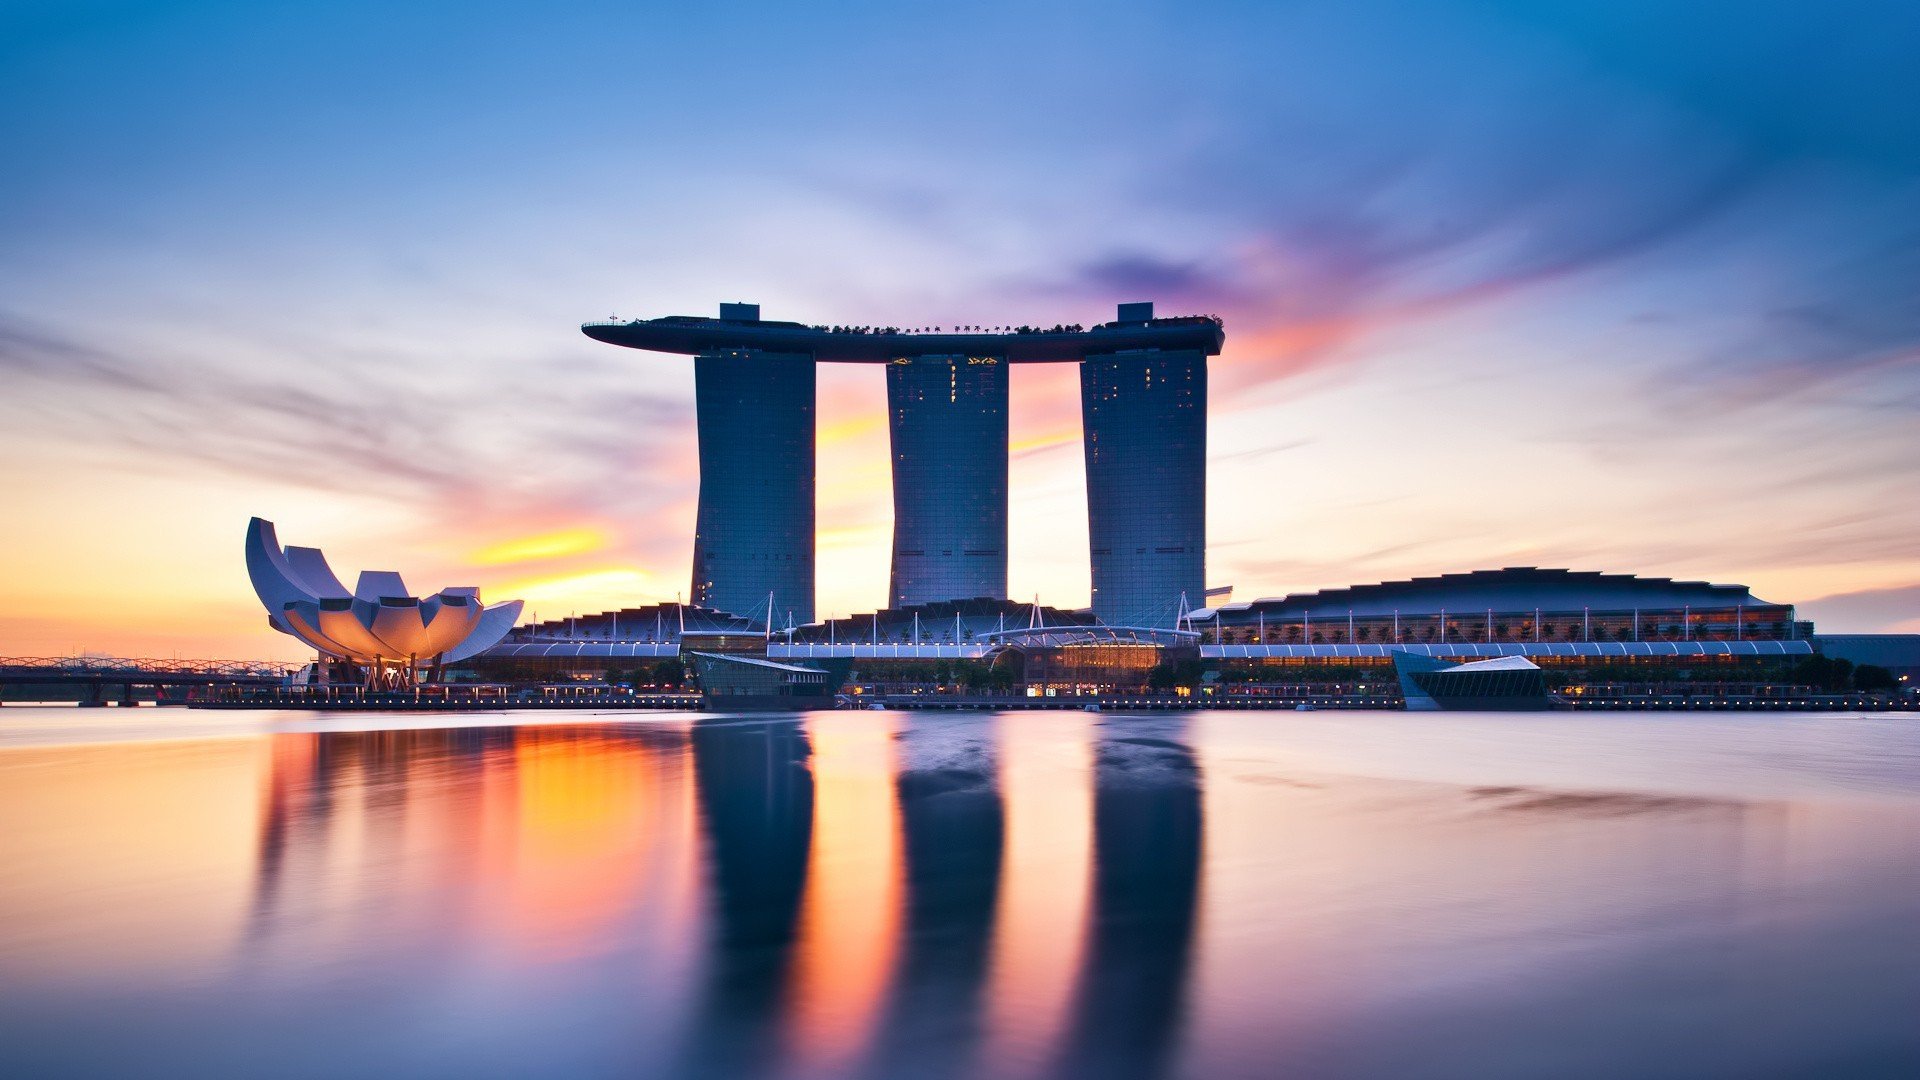 Marina Bay Singapore Hotels Reflection Architecture Wallpapers Hd Desktop And Mobile Backgrounds